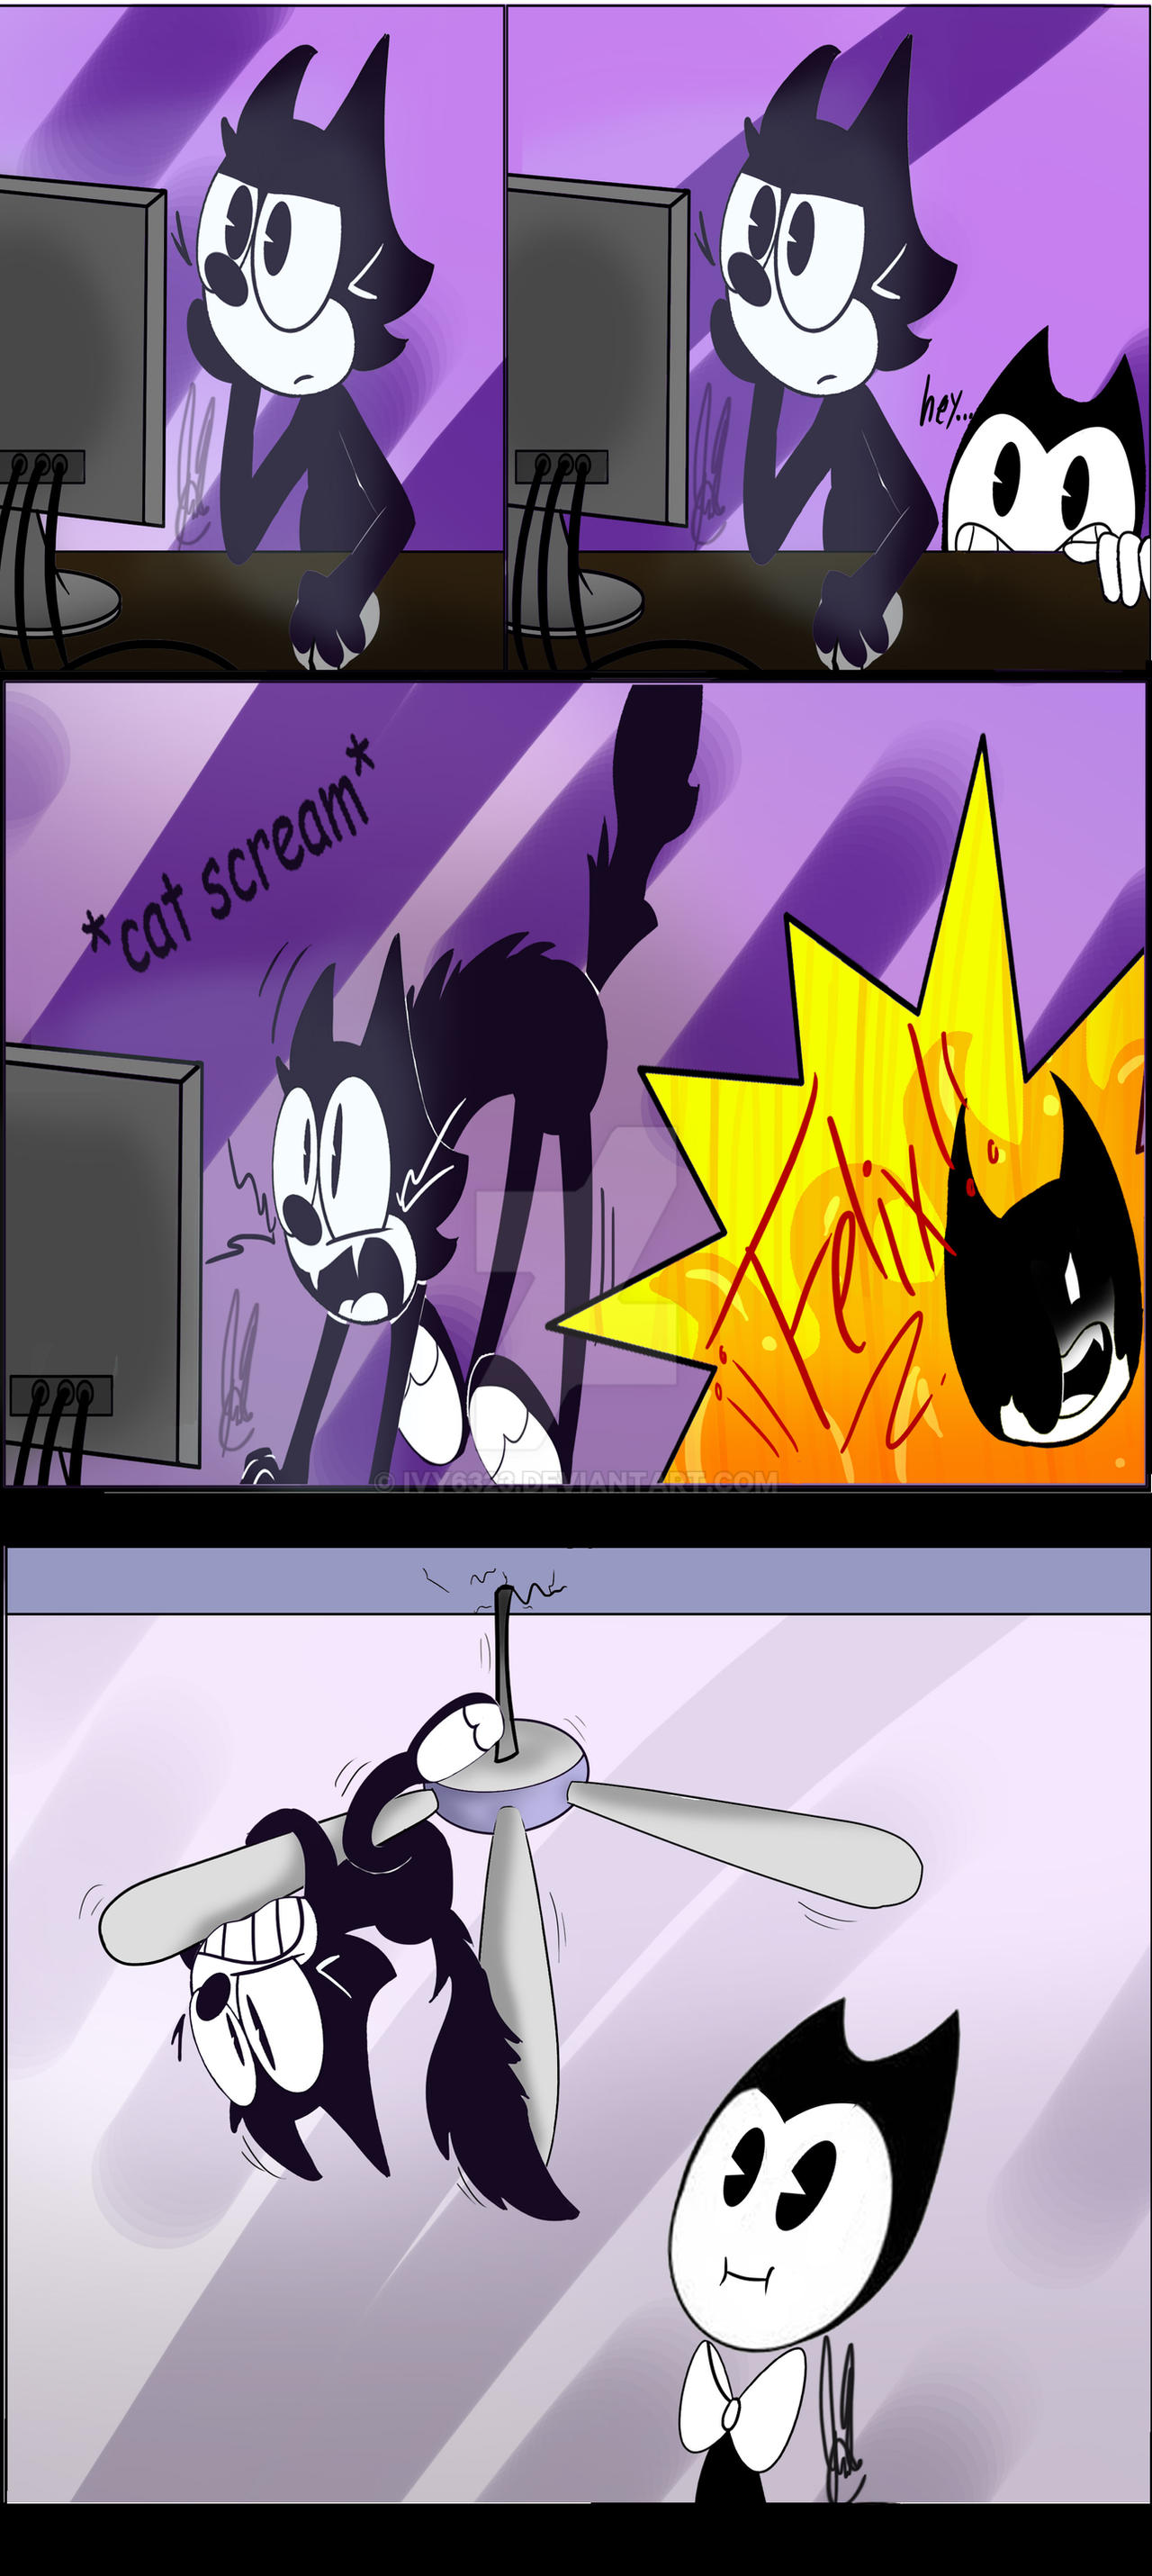 bendy and felix the cat comic? by ivy6323 on DeviantArt